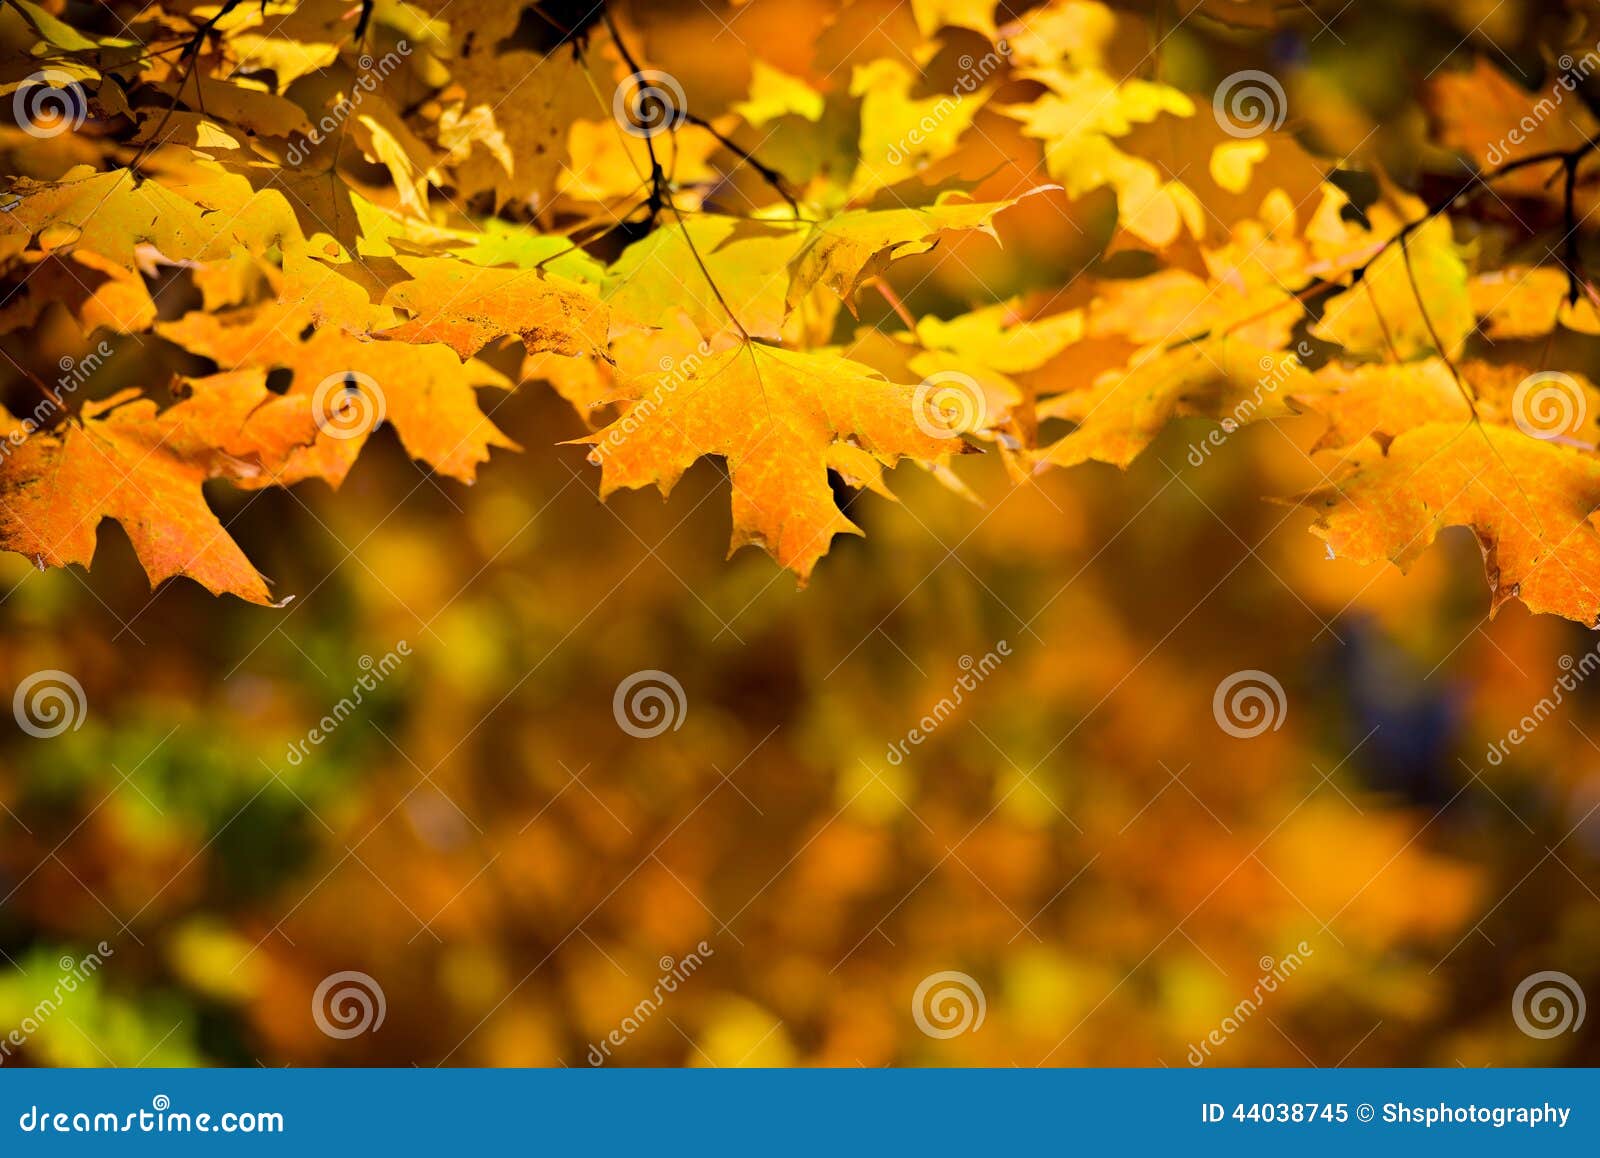 Golden Fall Leaves stock image. Image of plant, backdrop - 44038745